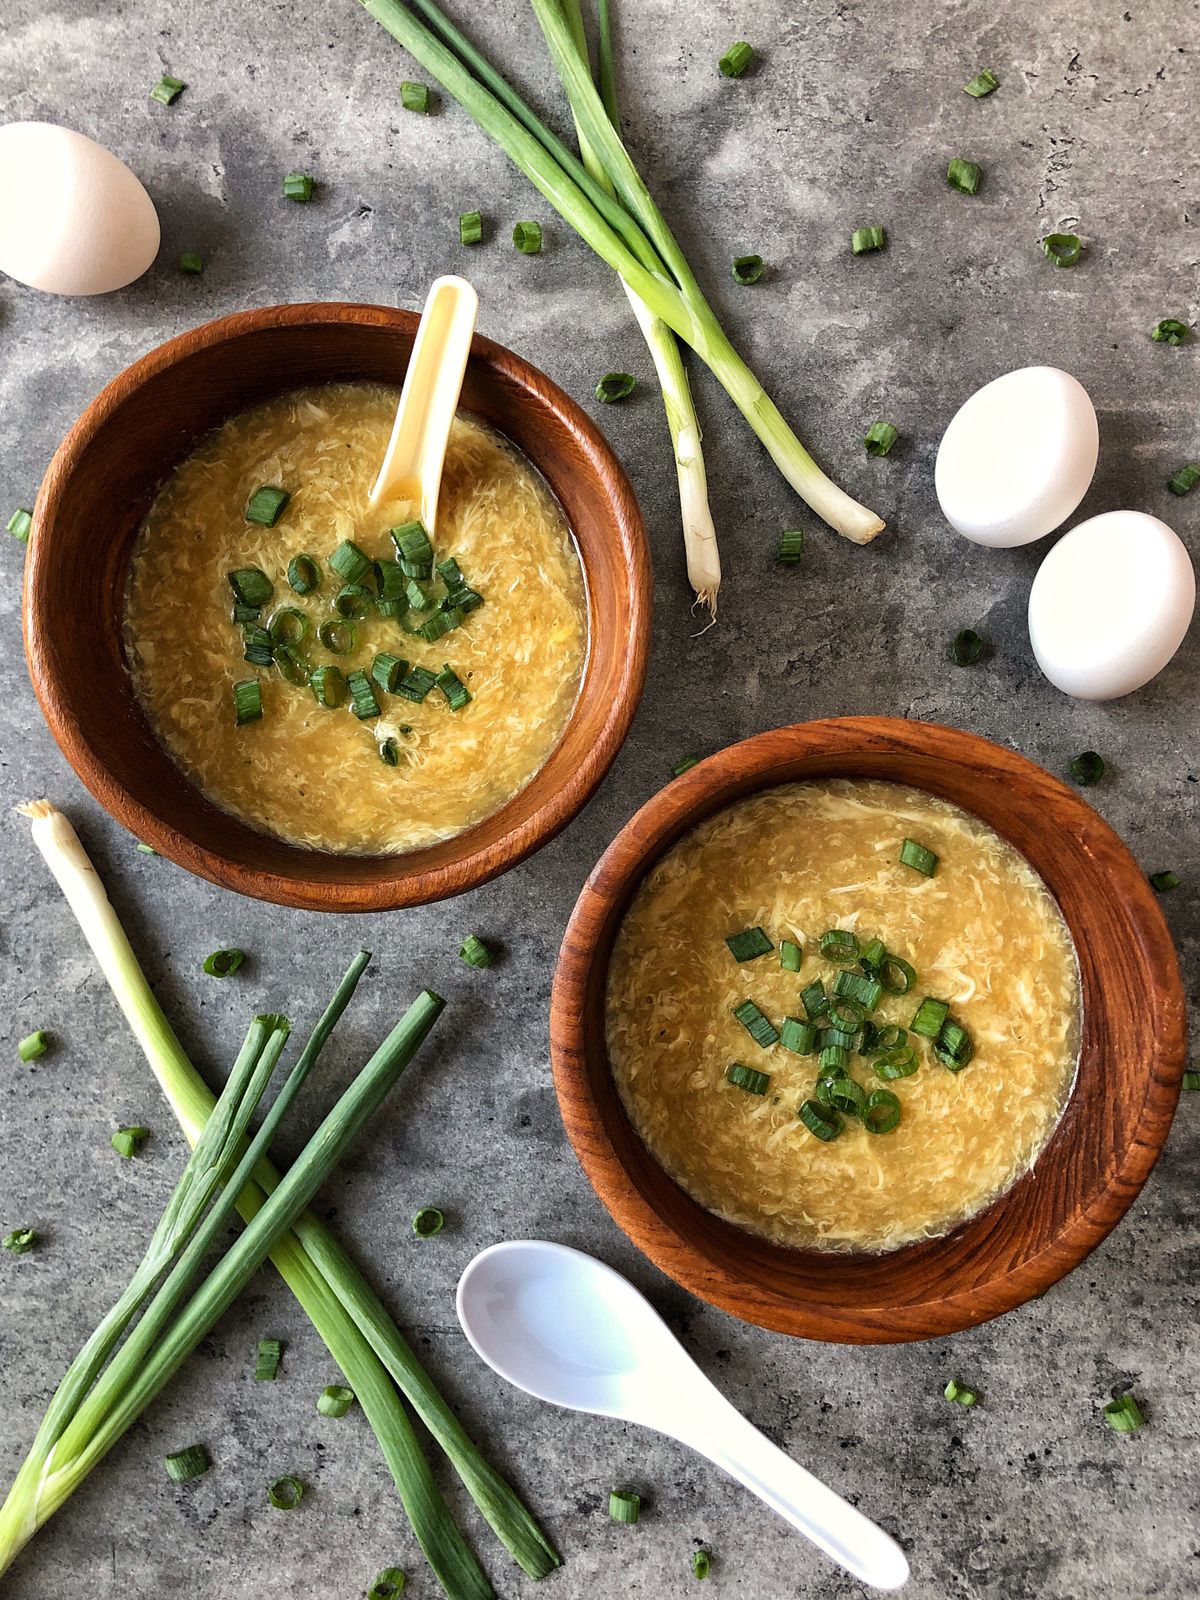 Egg drop soup requires minimal ingredients and is quick to make.  (Audrey Alfaro/For The Spokesman-Review)